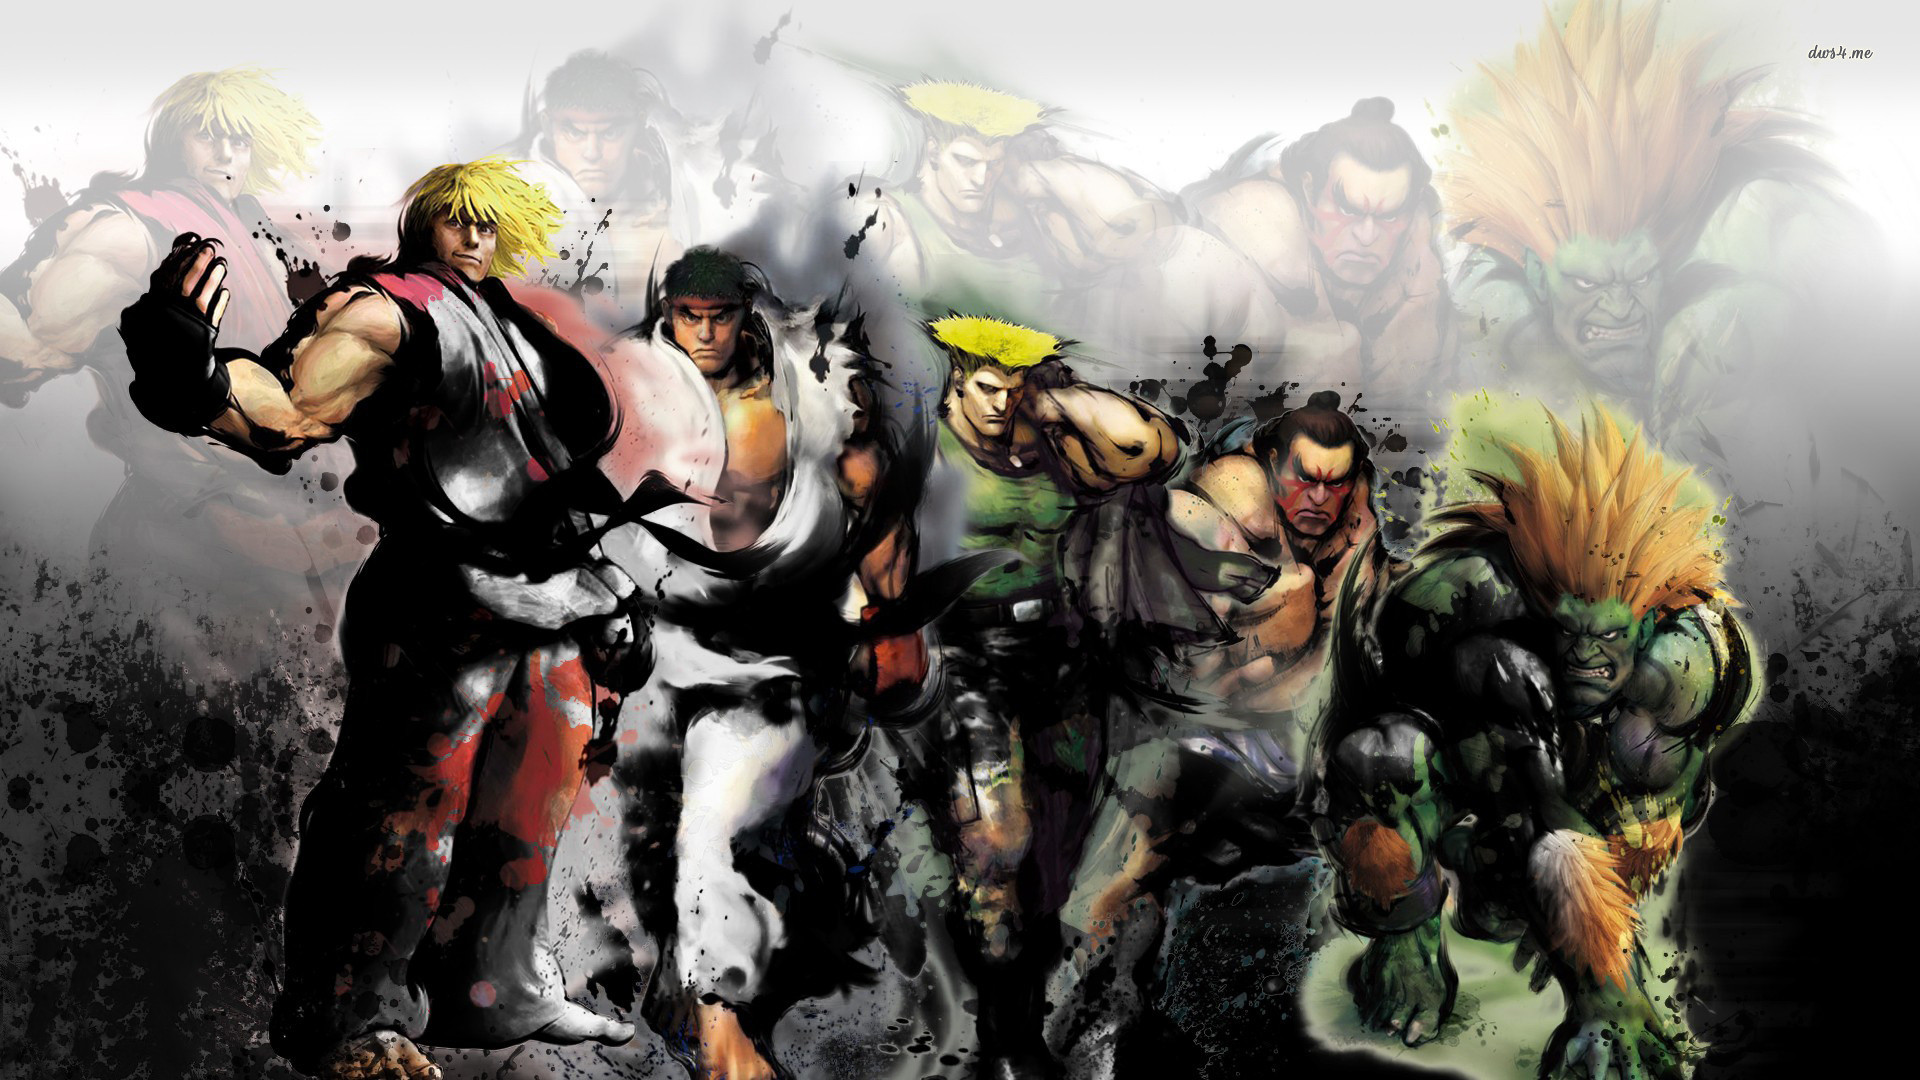 1920x1080 Street Fighter IV wallpaper - Game wallpapers - #13129